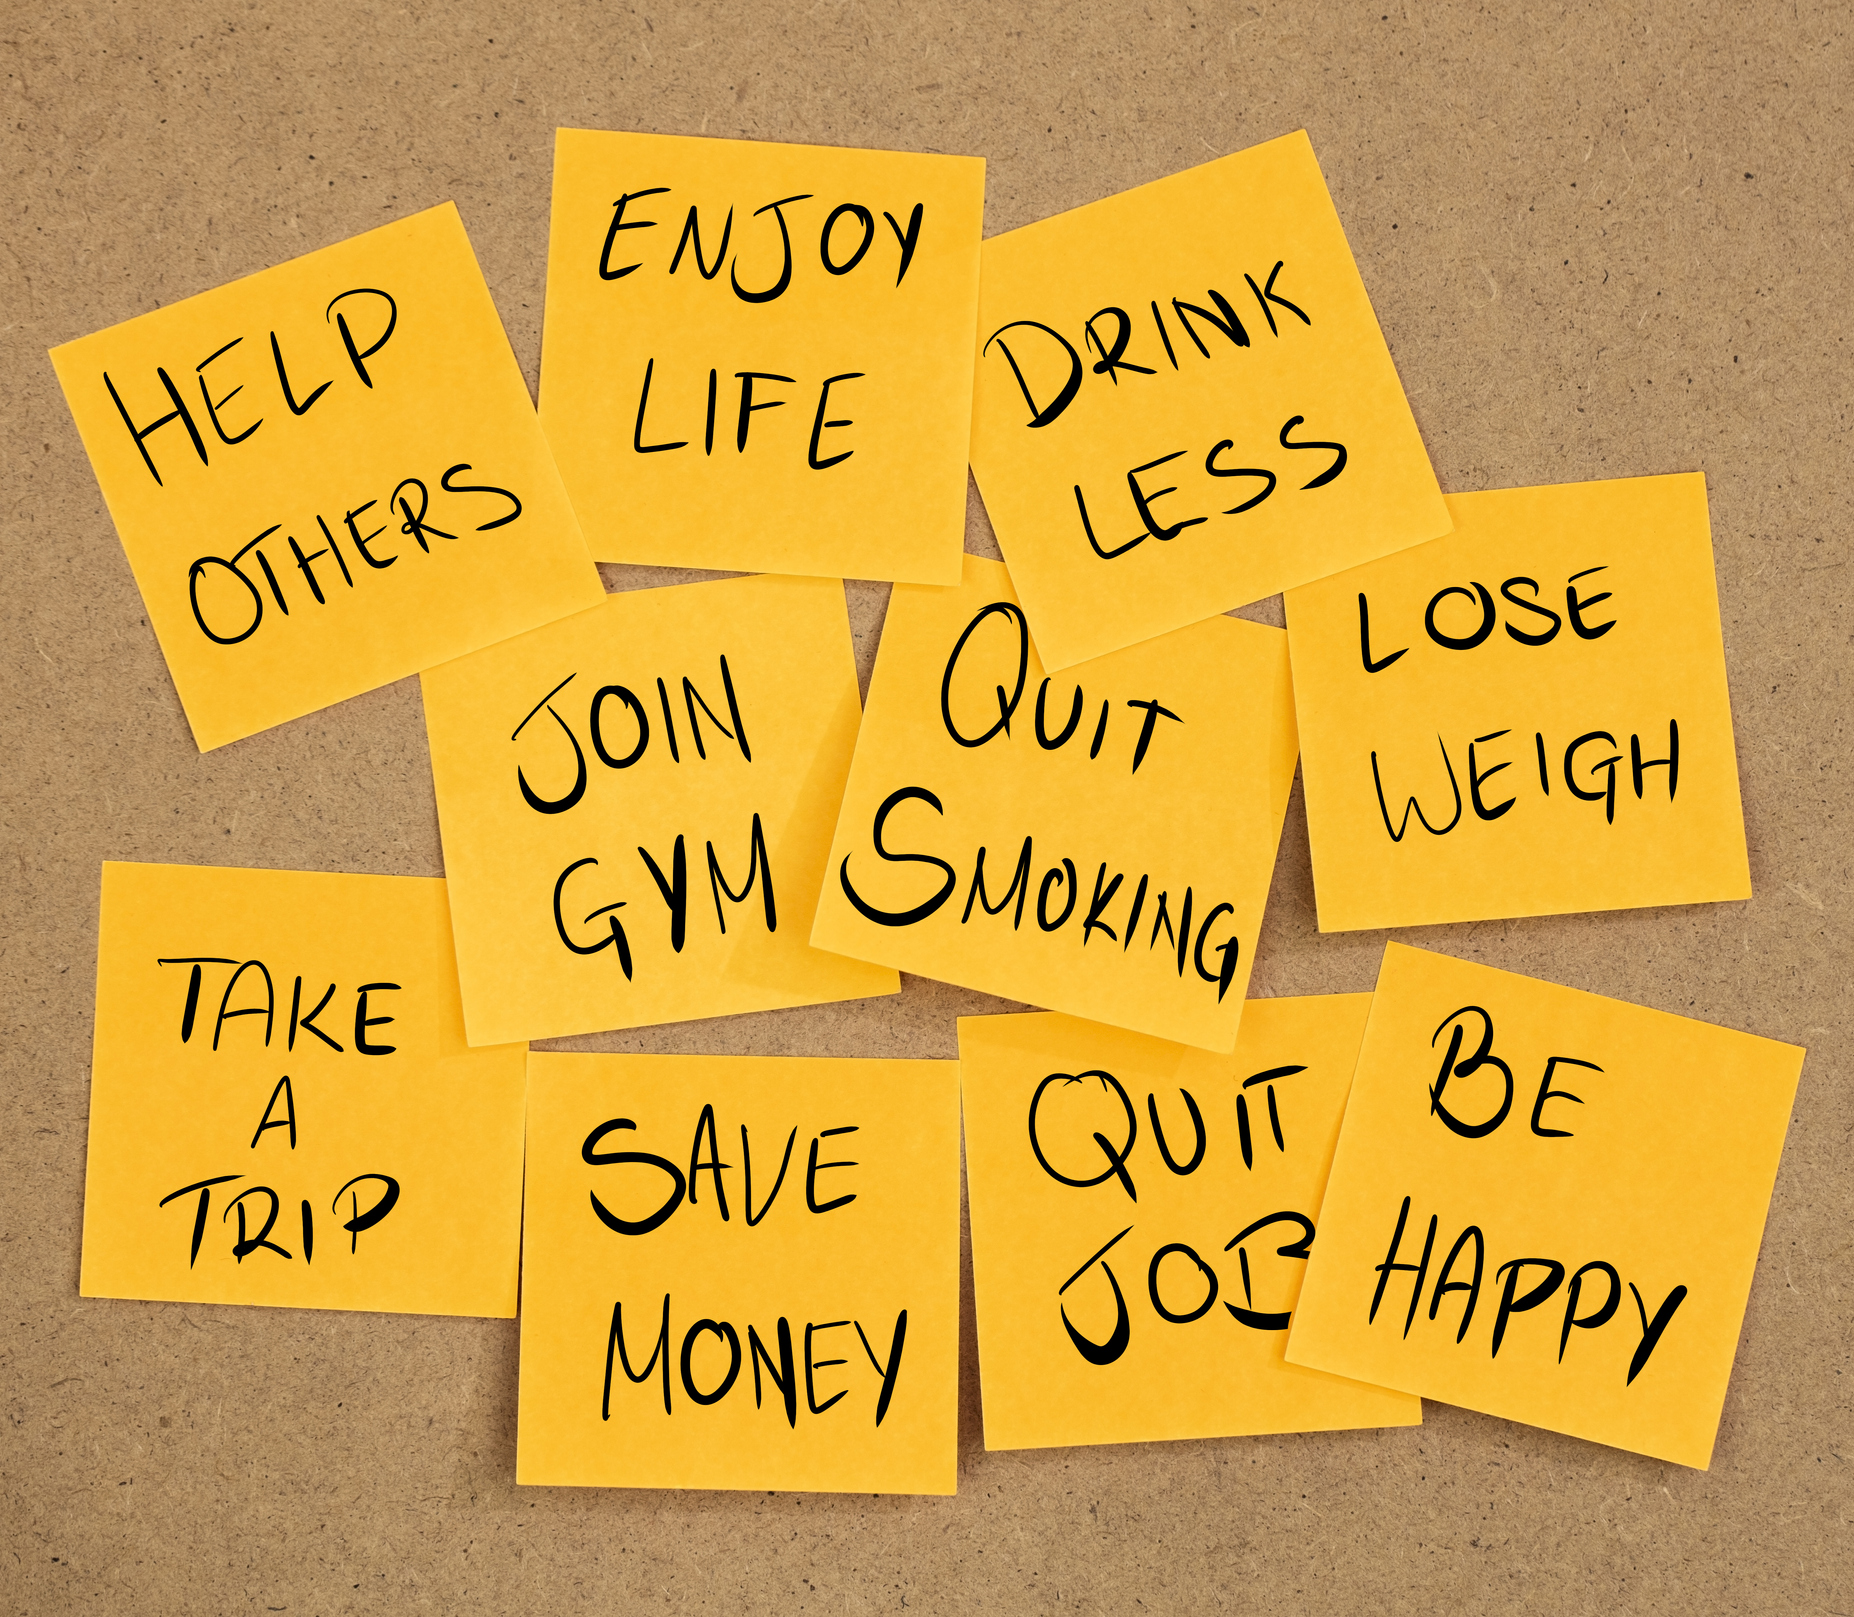 NEW YEAR RESOLUTIONS 2020 on sticky notes on a board